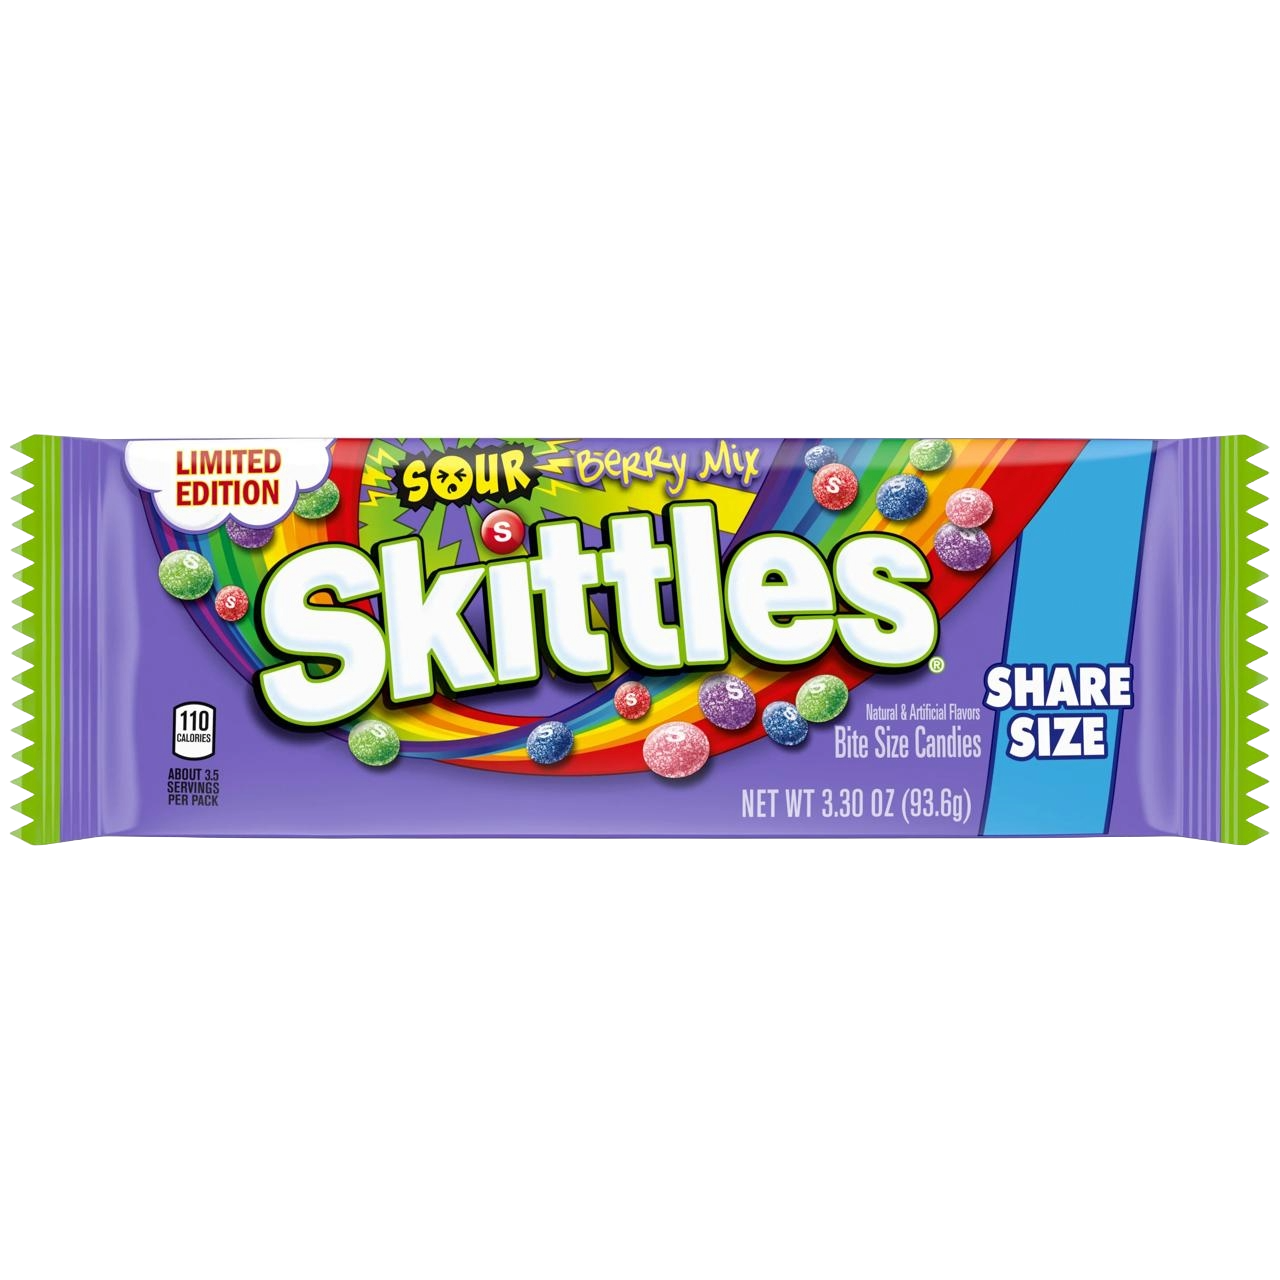 Skittles Sour Berry Mix